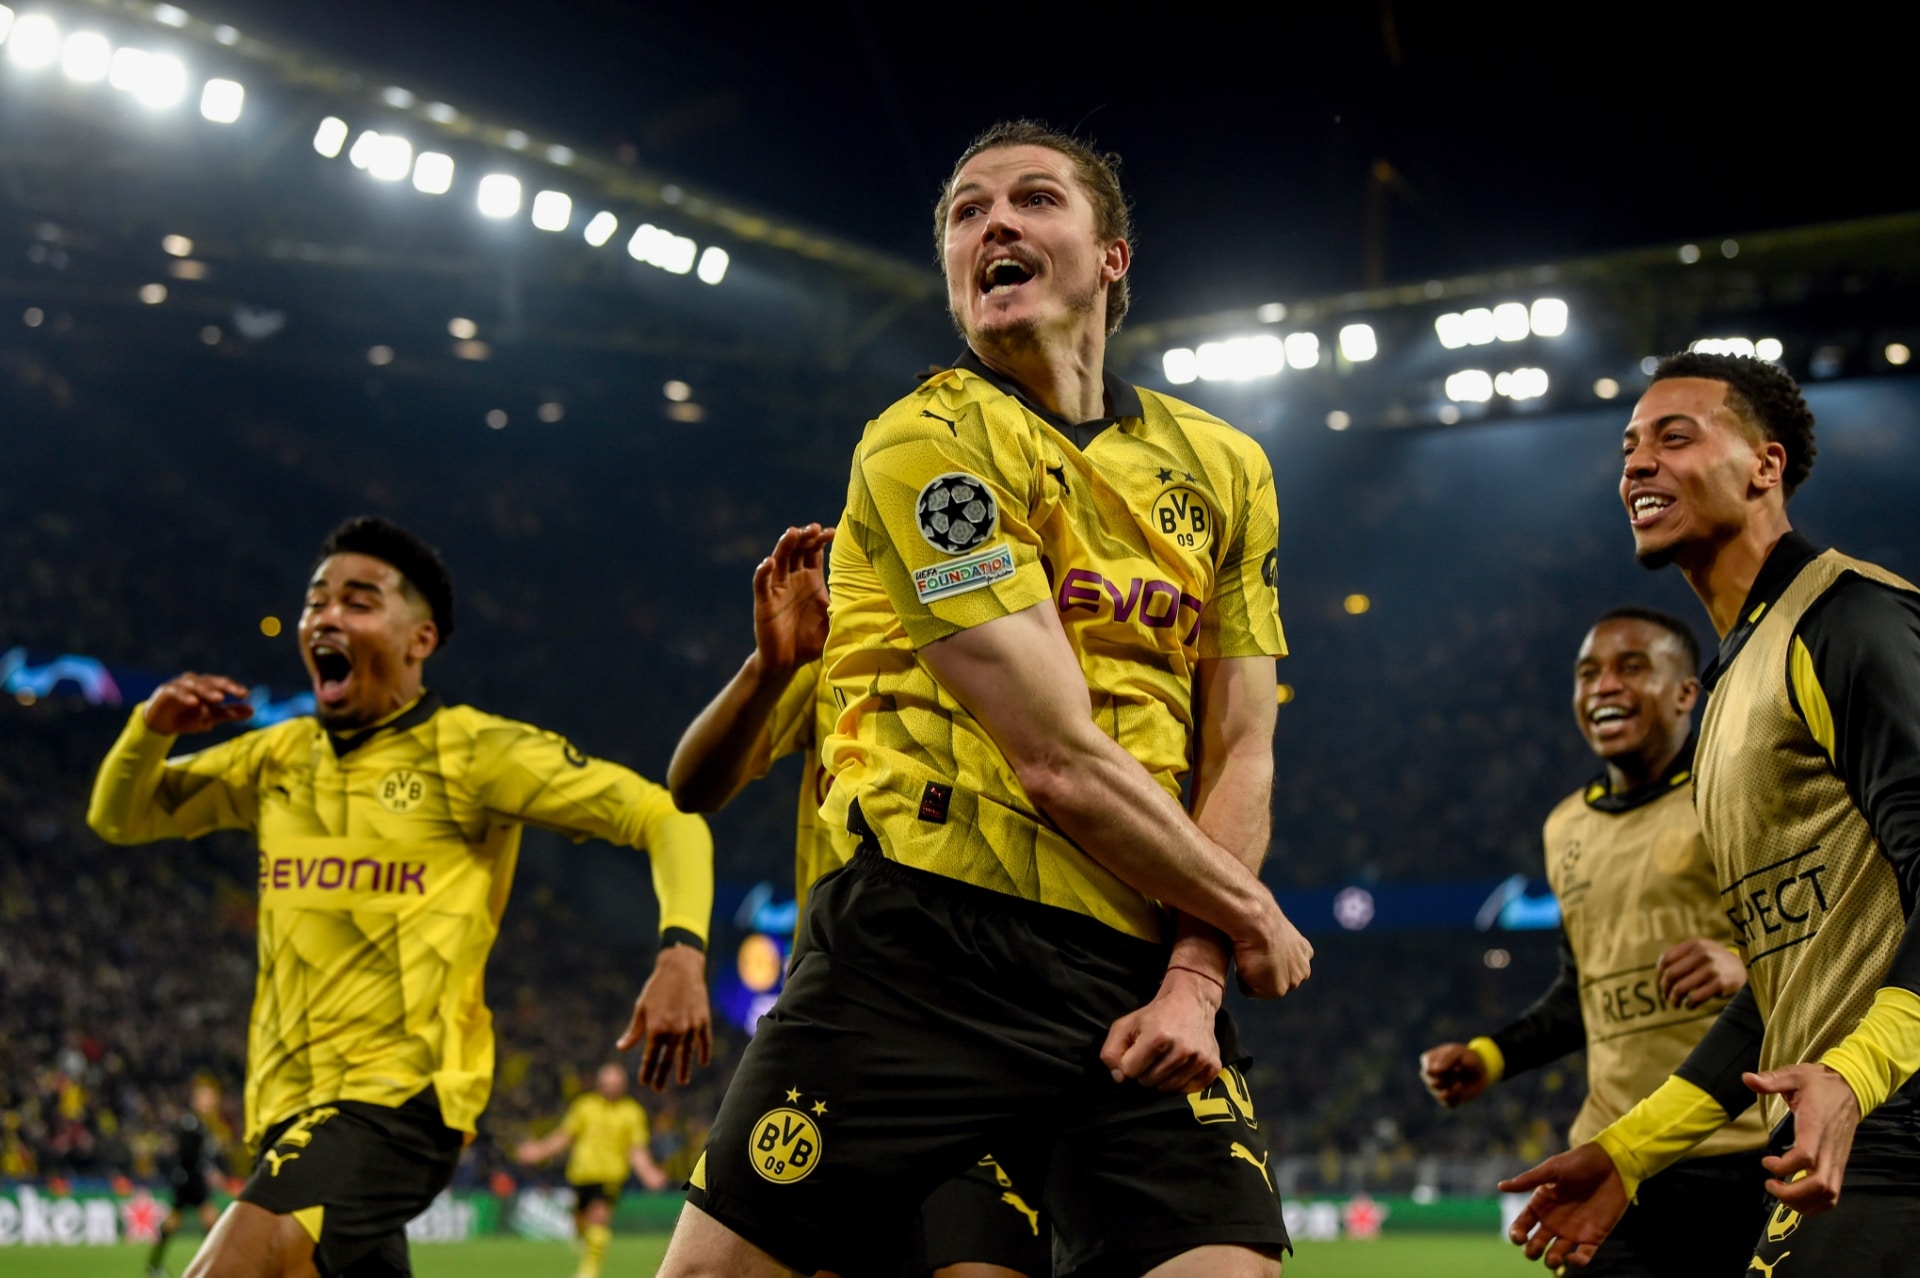 UCL: Maatsen registers one as Dortmund hand Atletico exit in six-goal thriller